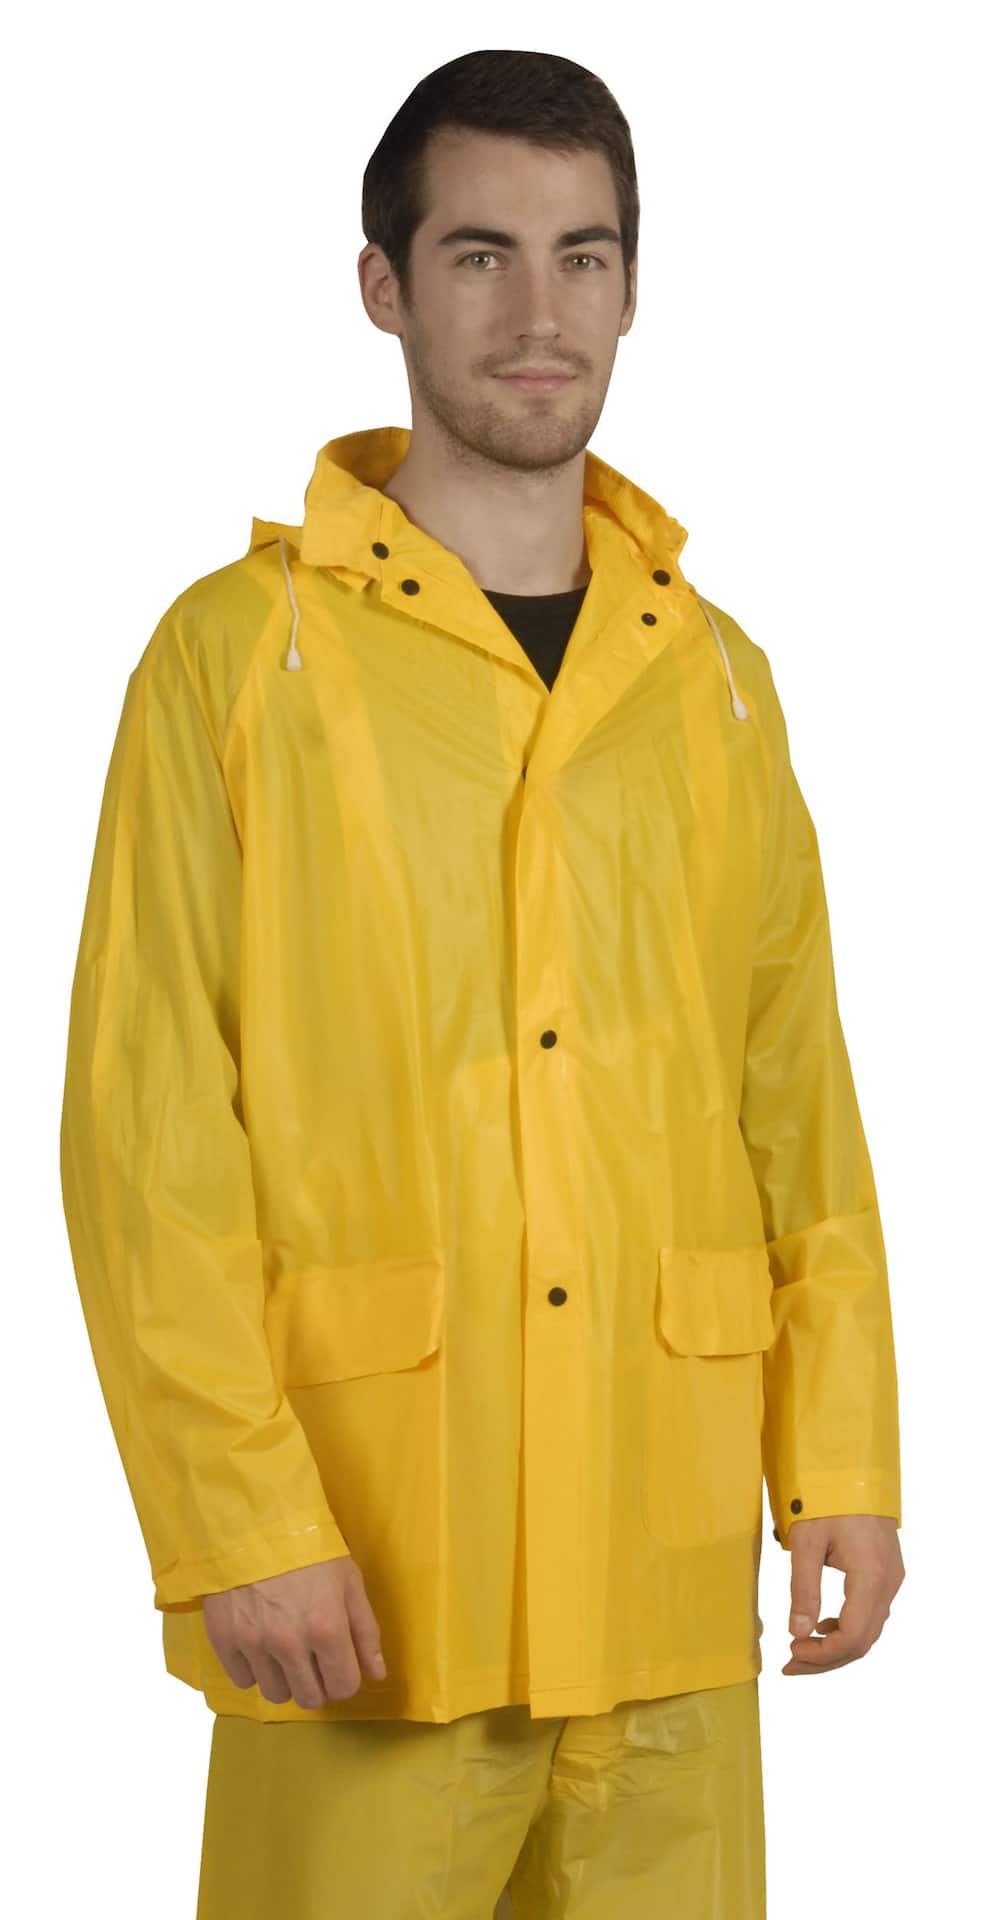 A Guide to PVC Rain Gear for Fishing - Best fit, weight & styles